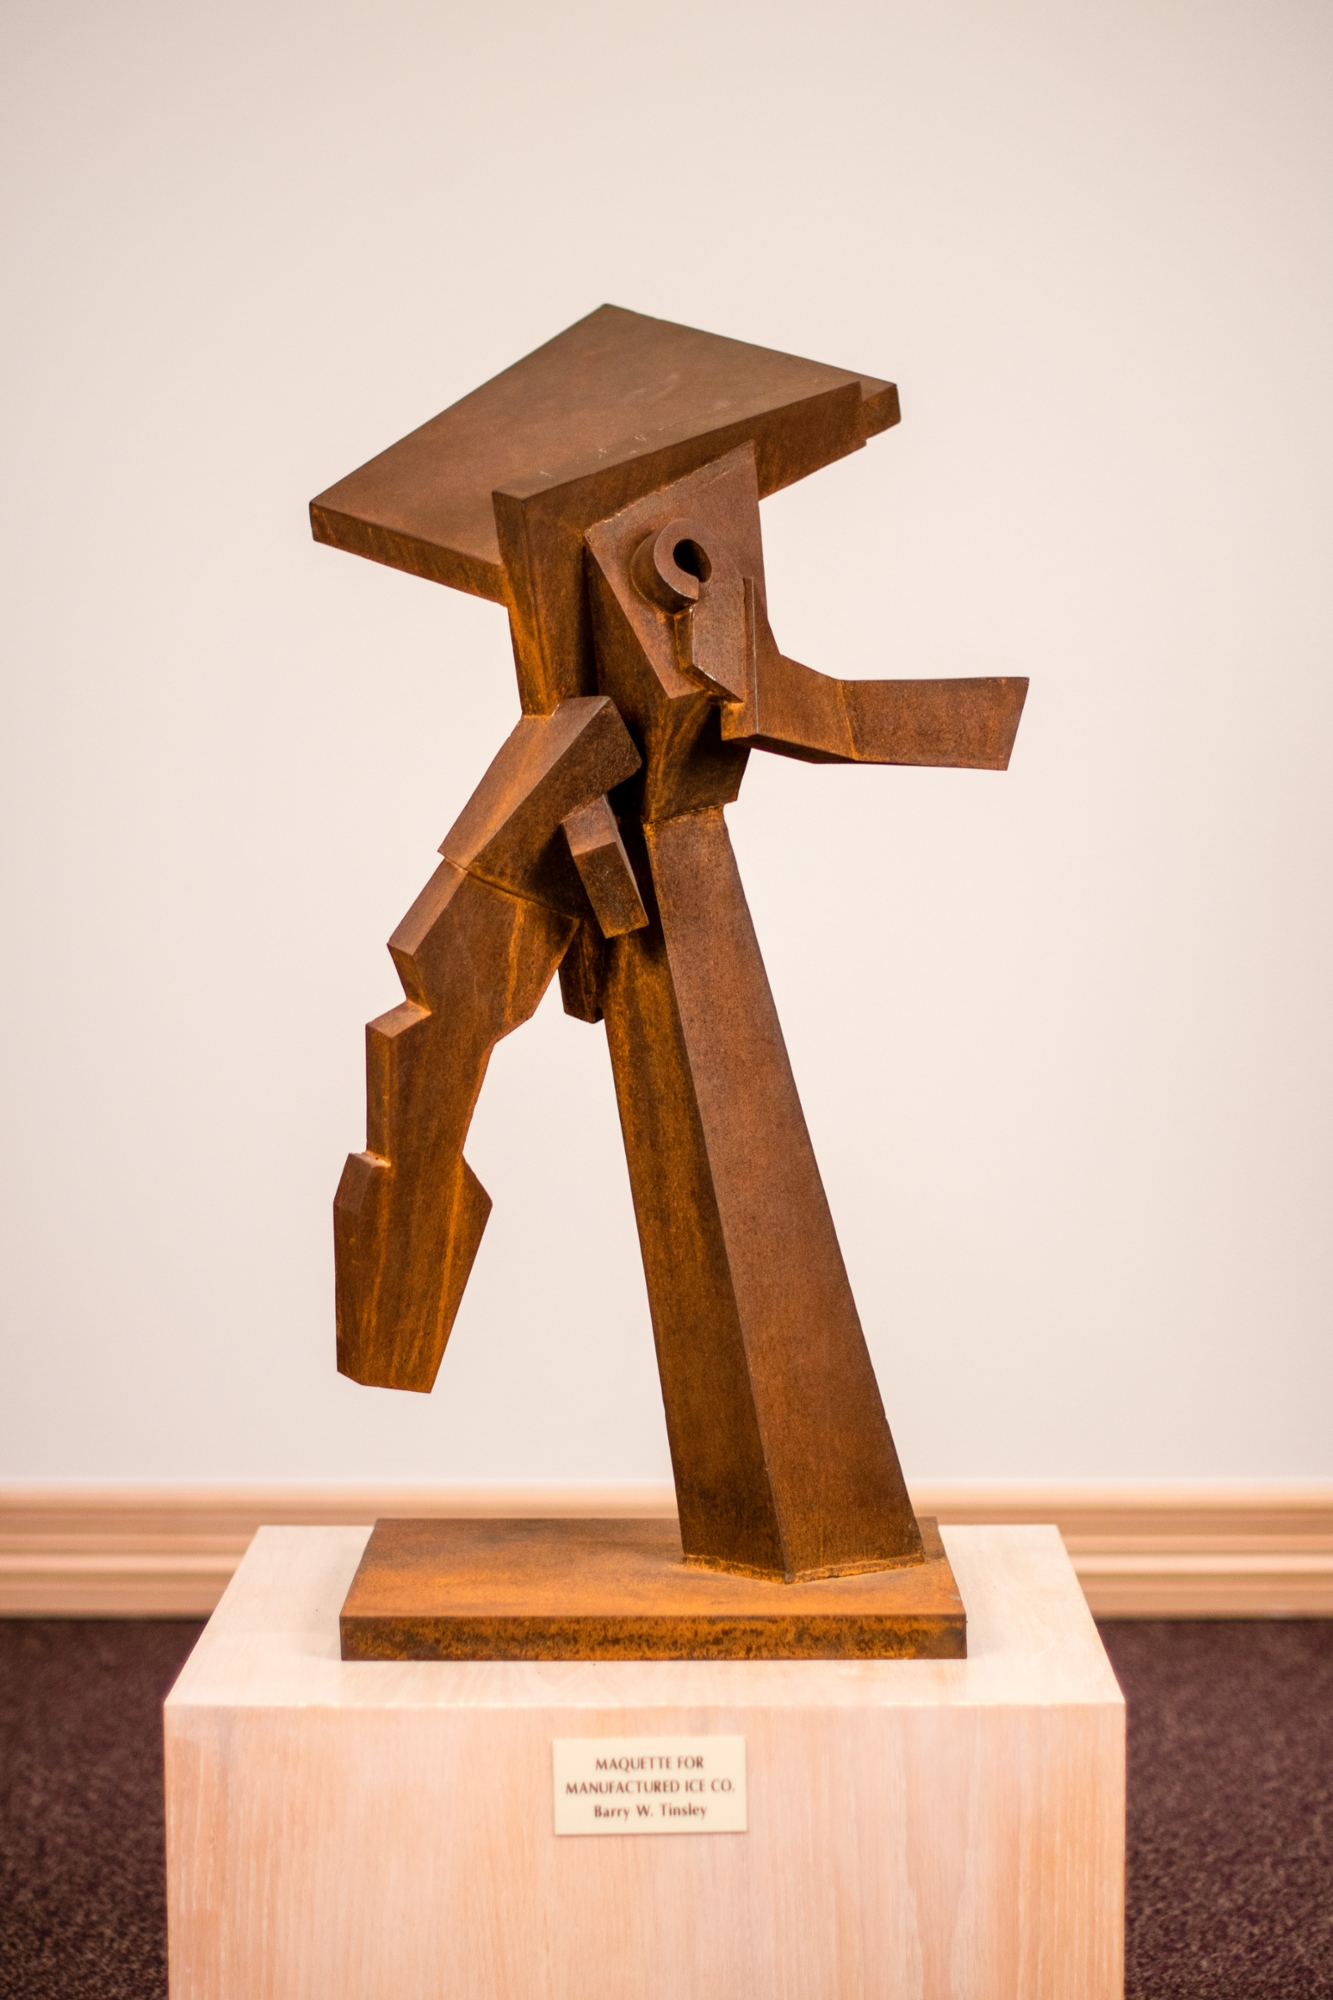 1974 Sculpture: Maquette for Manufactured